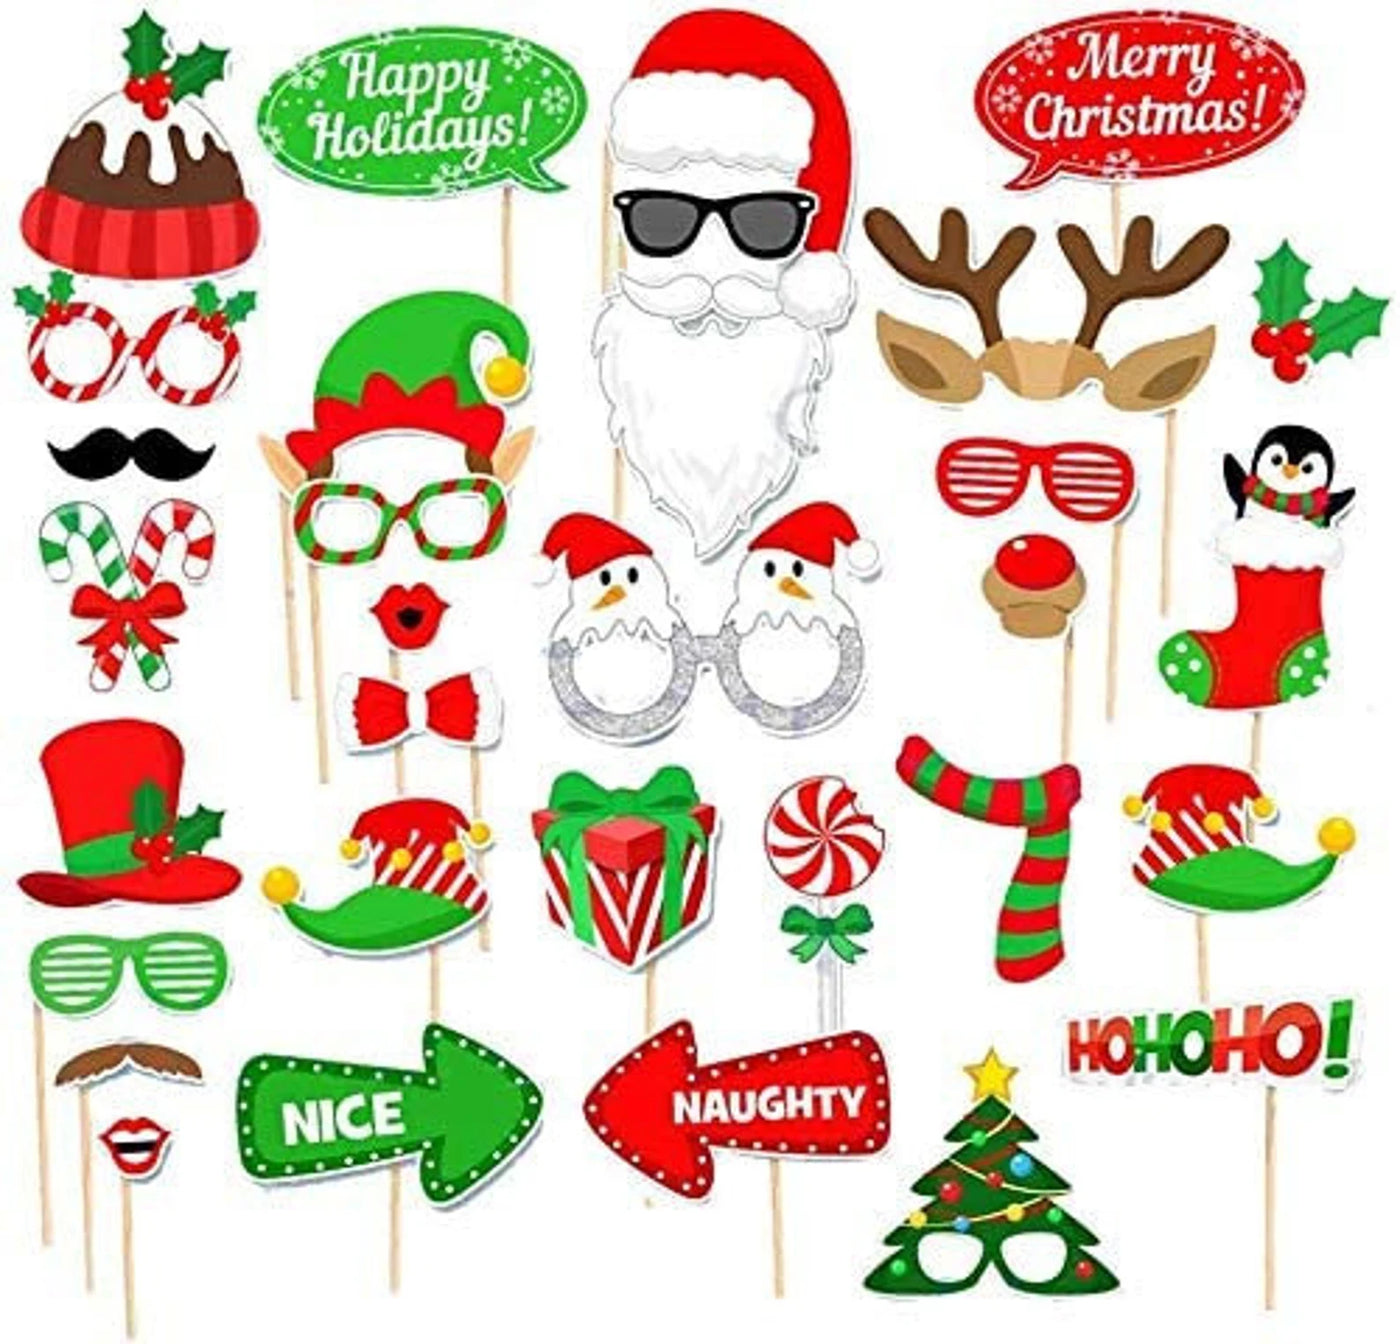 32pcs Christmas Photo Booth Props - Partyshakes Photo Props